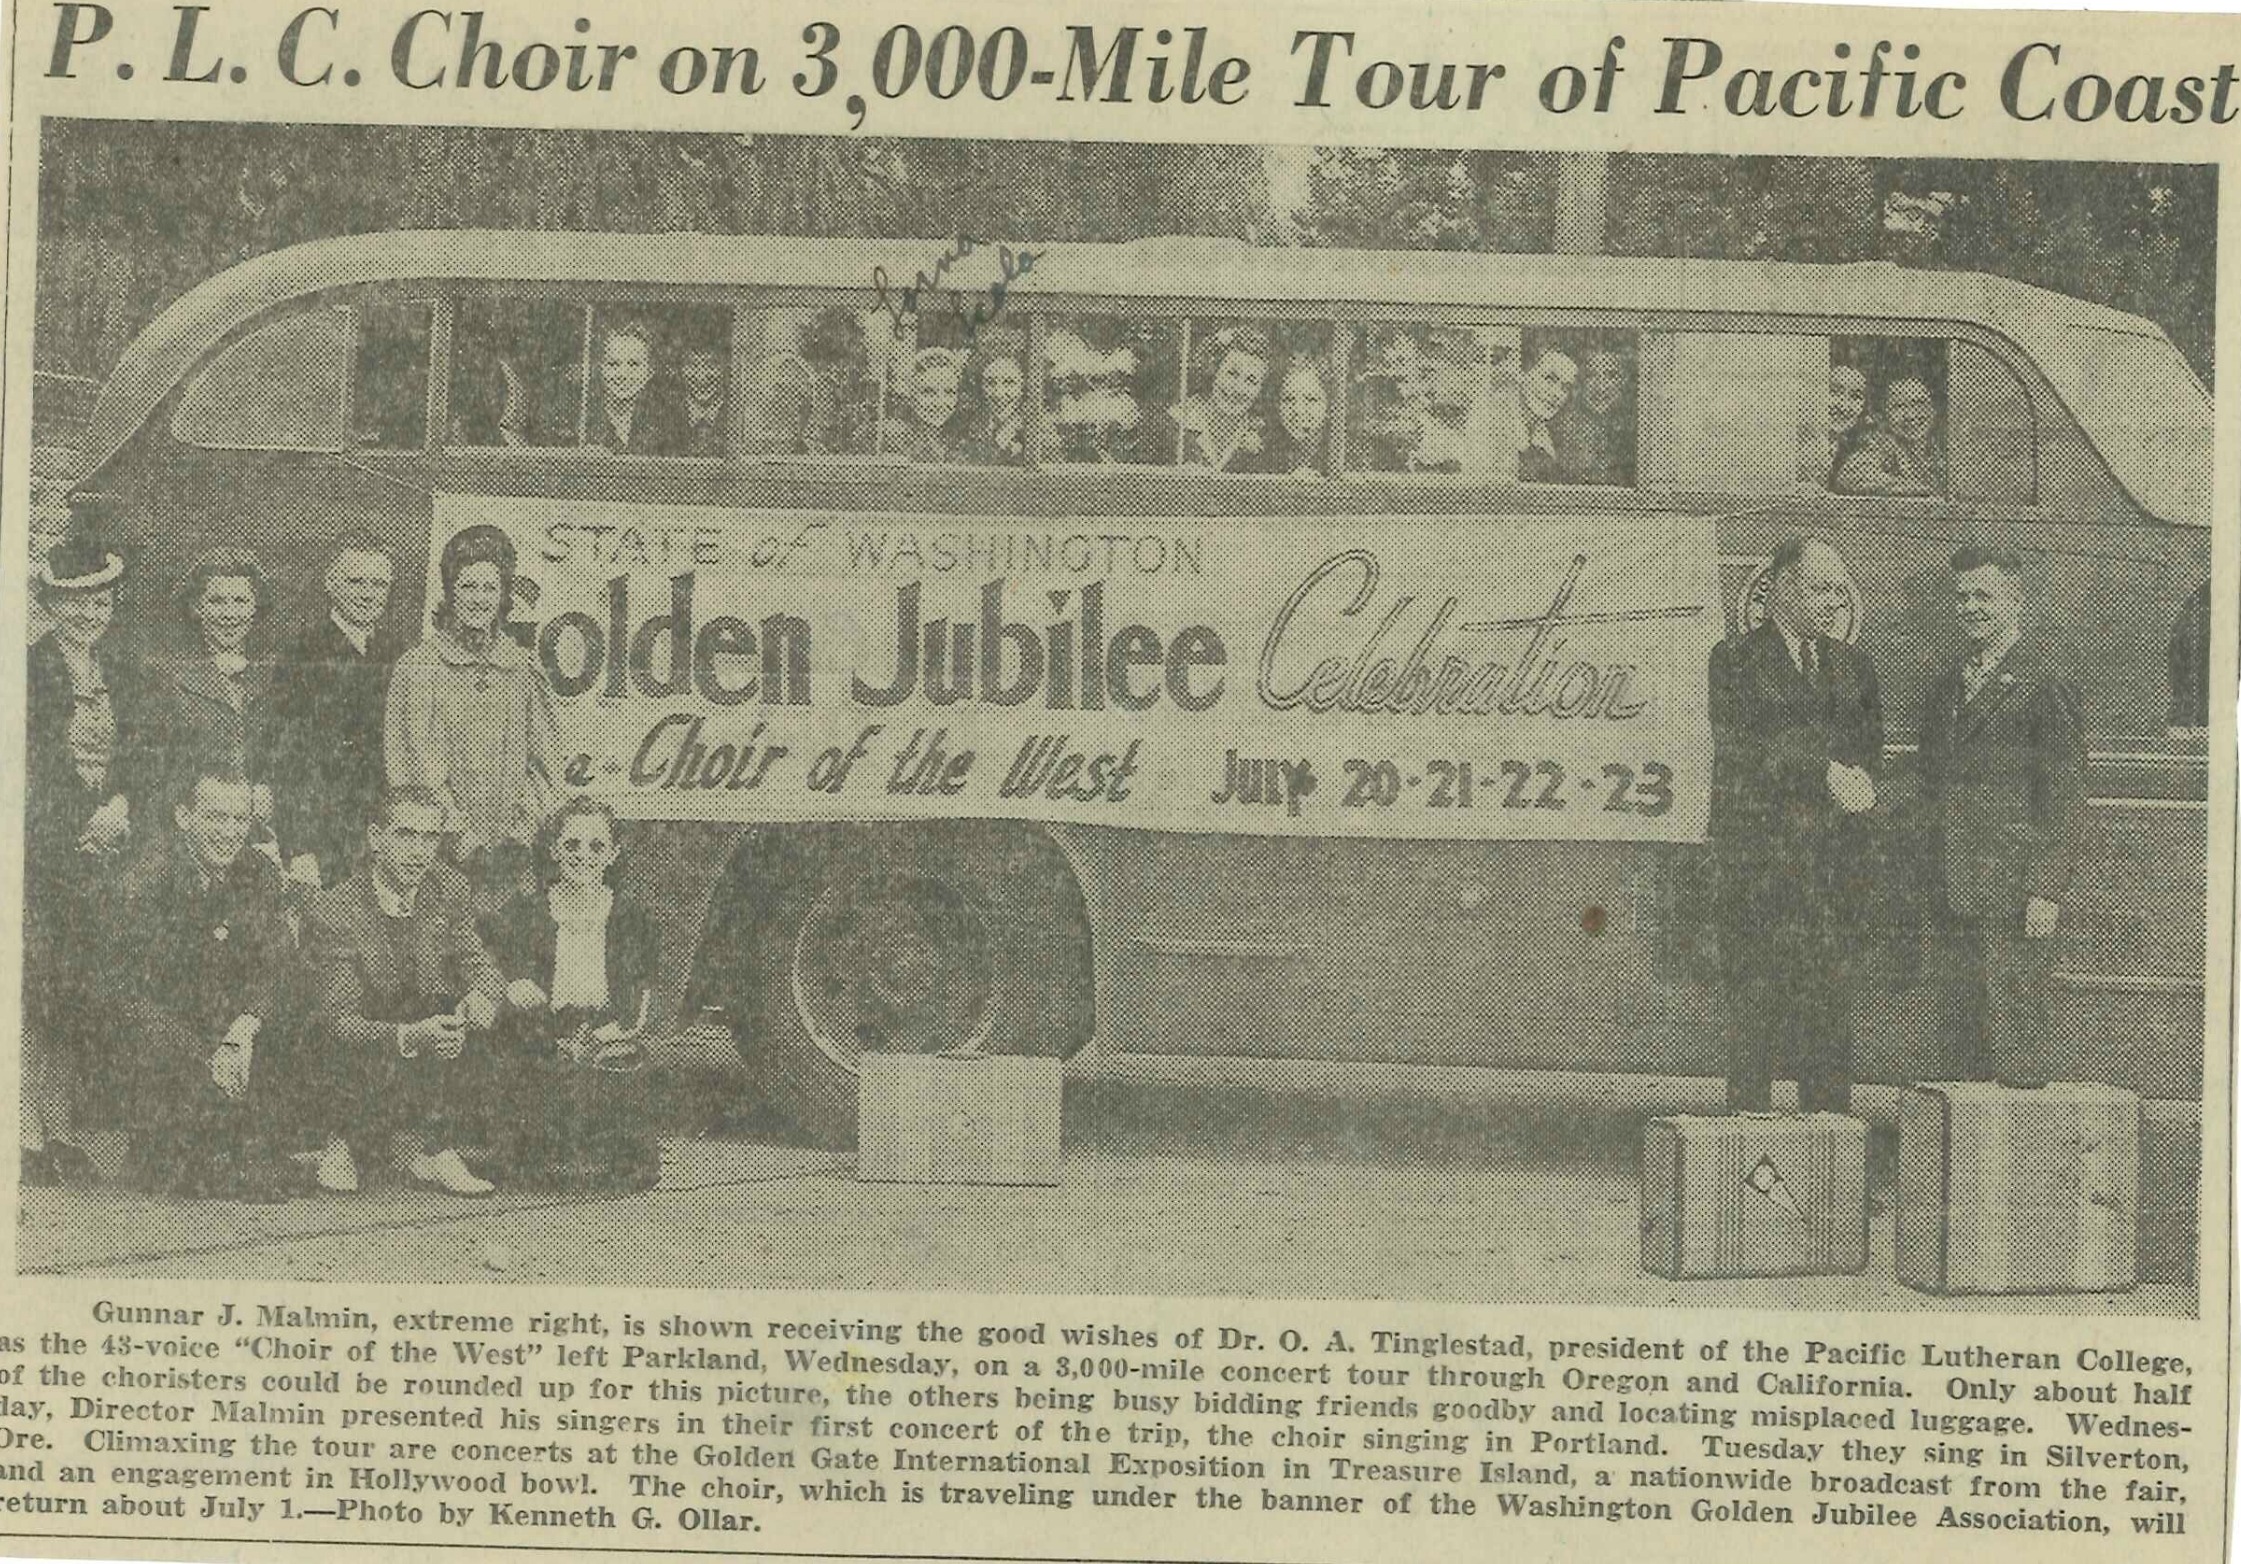 Choir of the West members prepare to board the bus at Pacific Lutheran College in 1939 for a 3,000-mile tour. (Photo courtesy of Lorna Vosburg Burt)